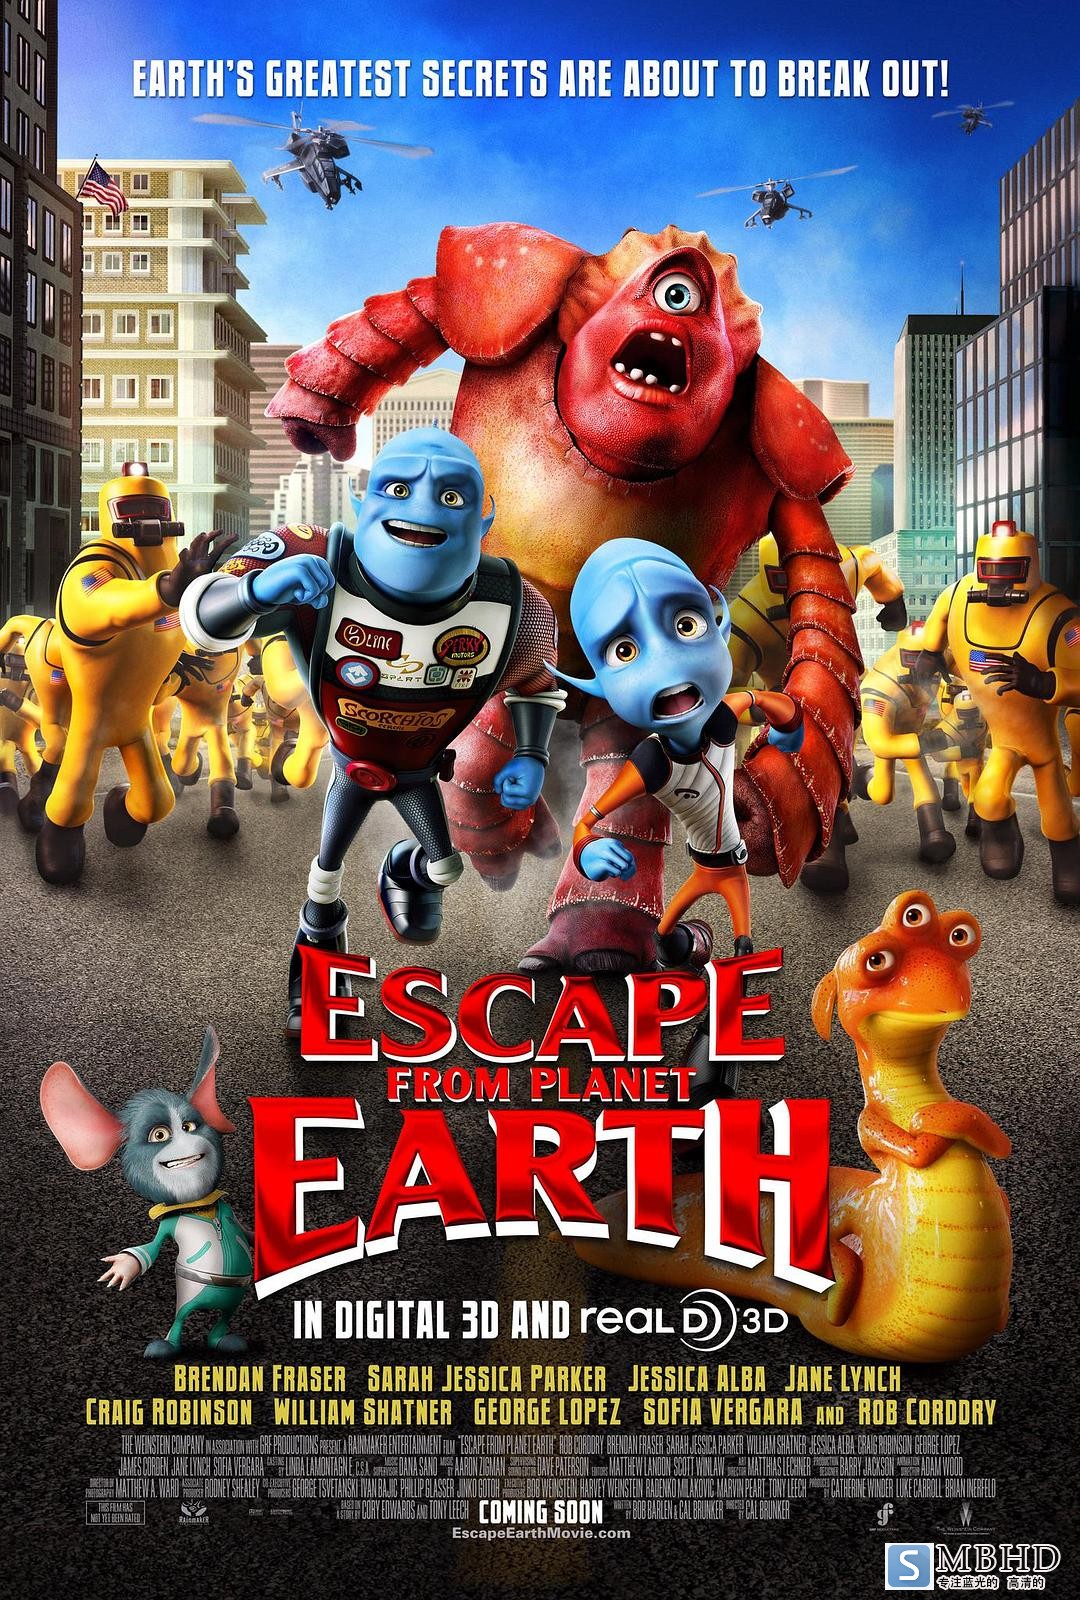 /˻ Escape.from.Planet.Earth.2013.1080p.BluRay.x264-SPARKS 4.37GB-1.png